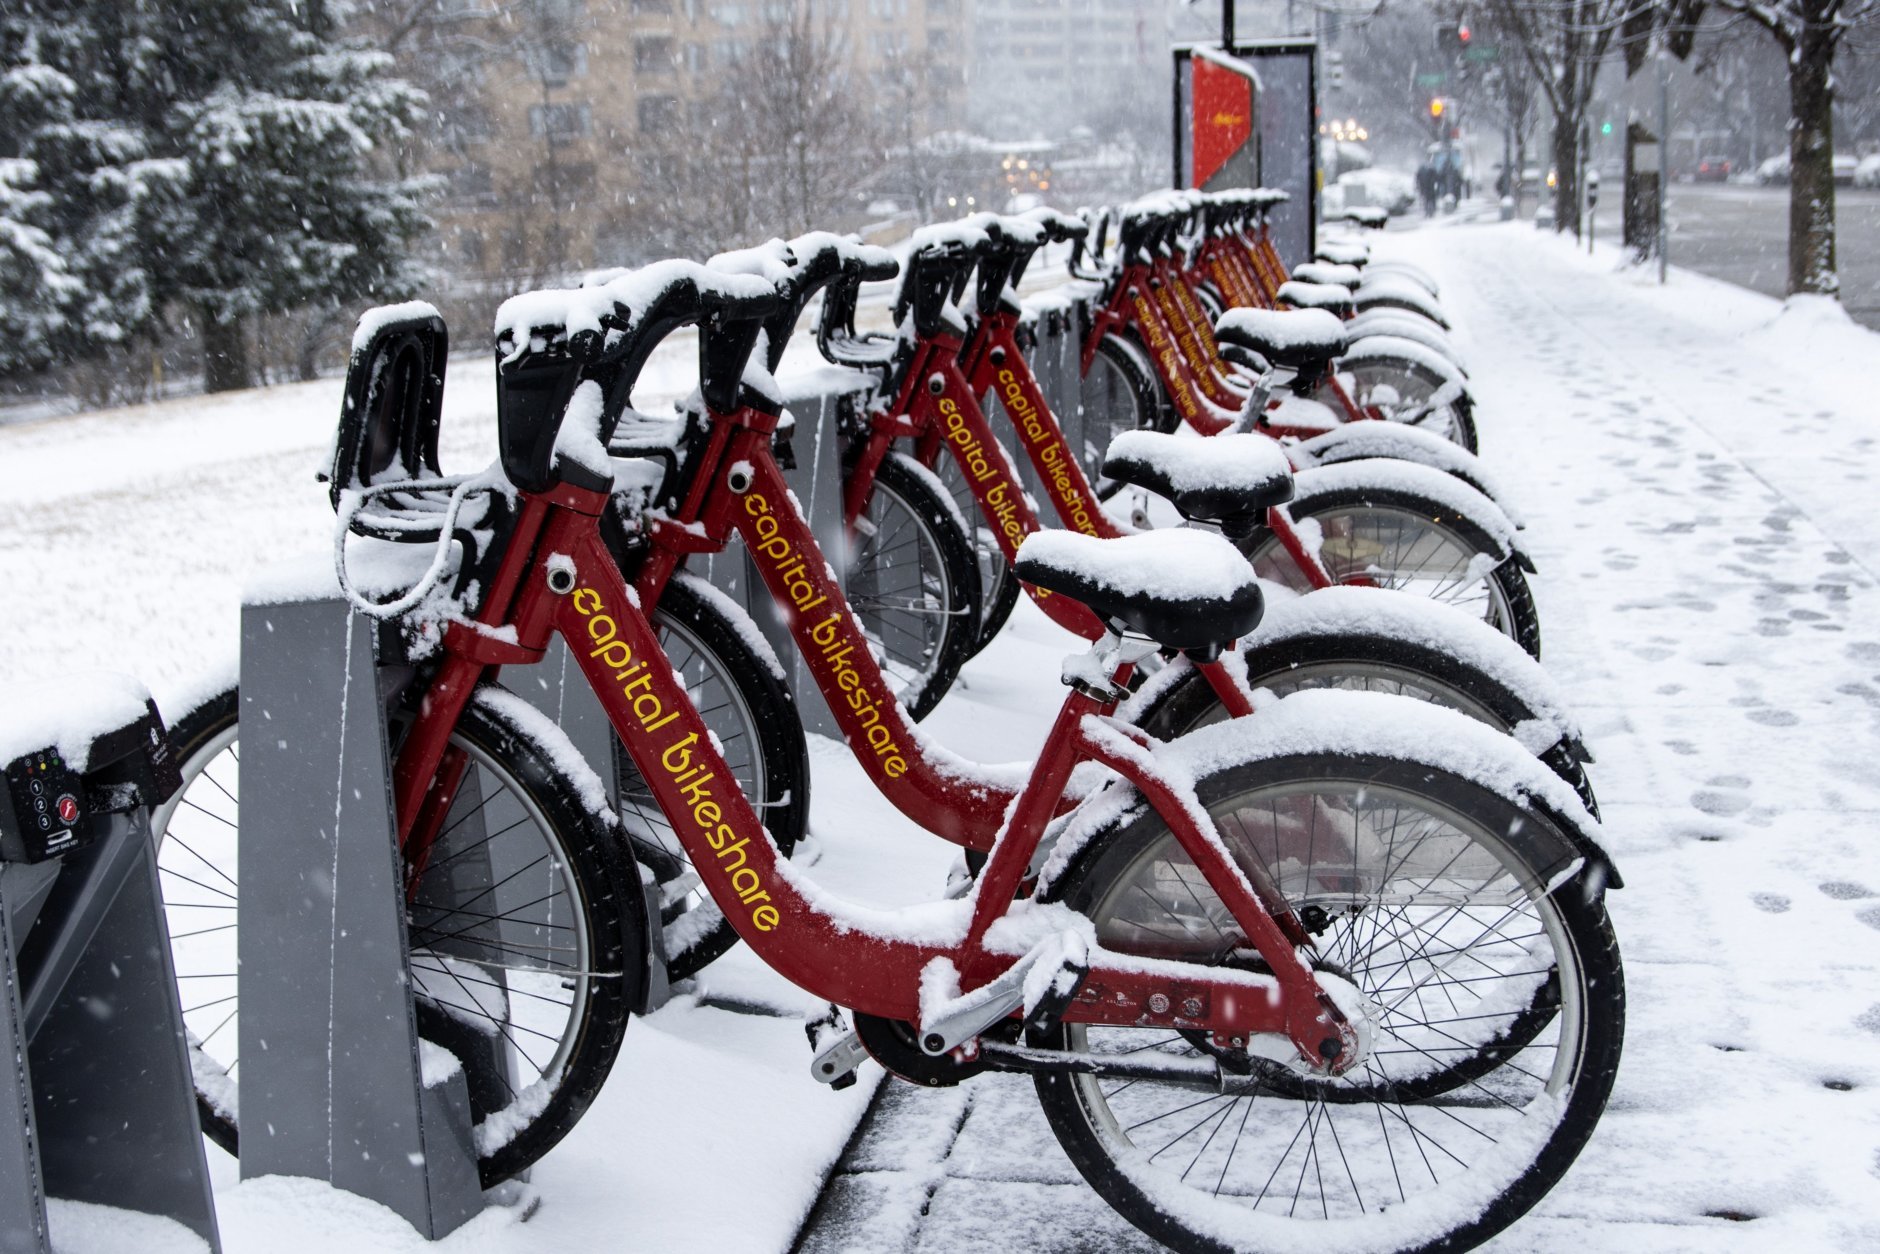 A Capital Bikeshare station near the intersection of Connecticut Avenue and Calvert Street, NW sits largely unused as heavy snow moves in on Wednesday morning. (WTOP/Alejandro Alvarez)